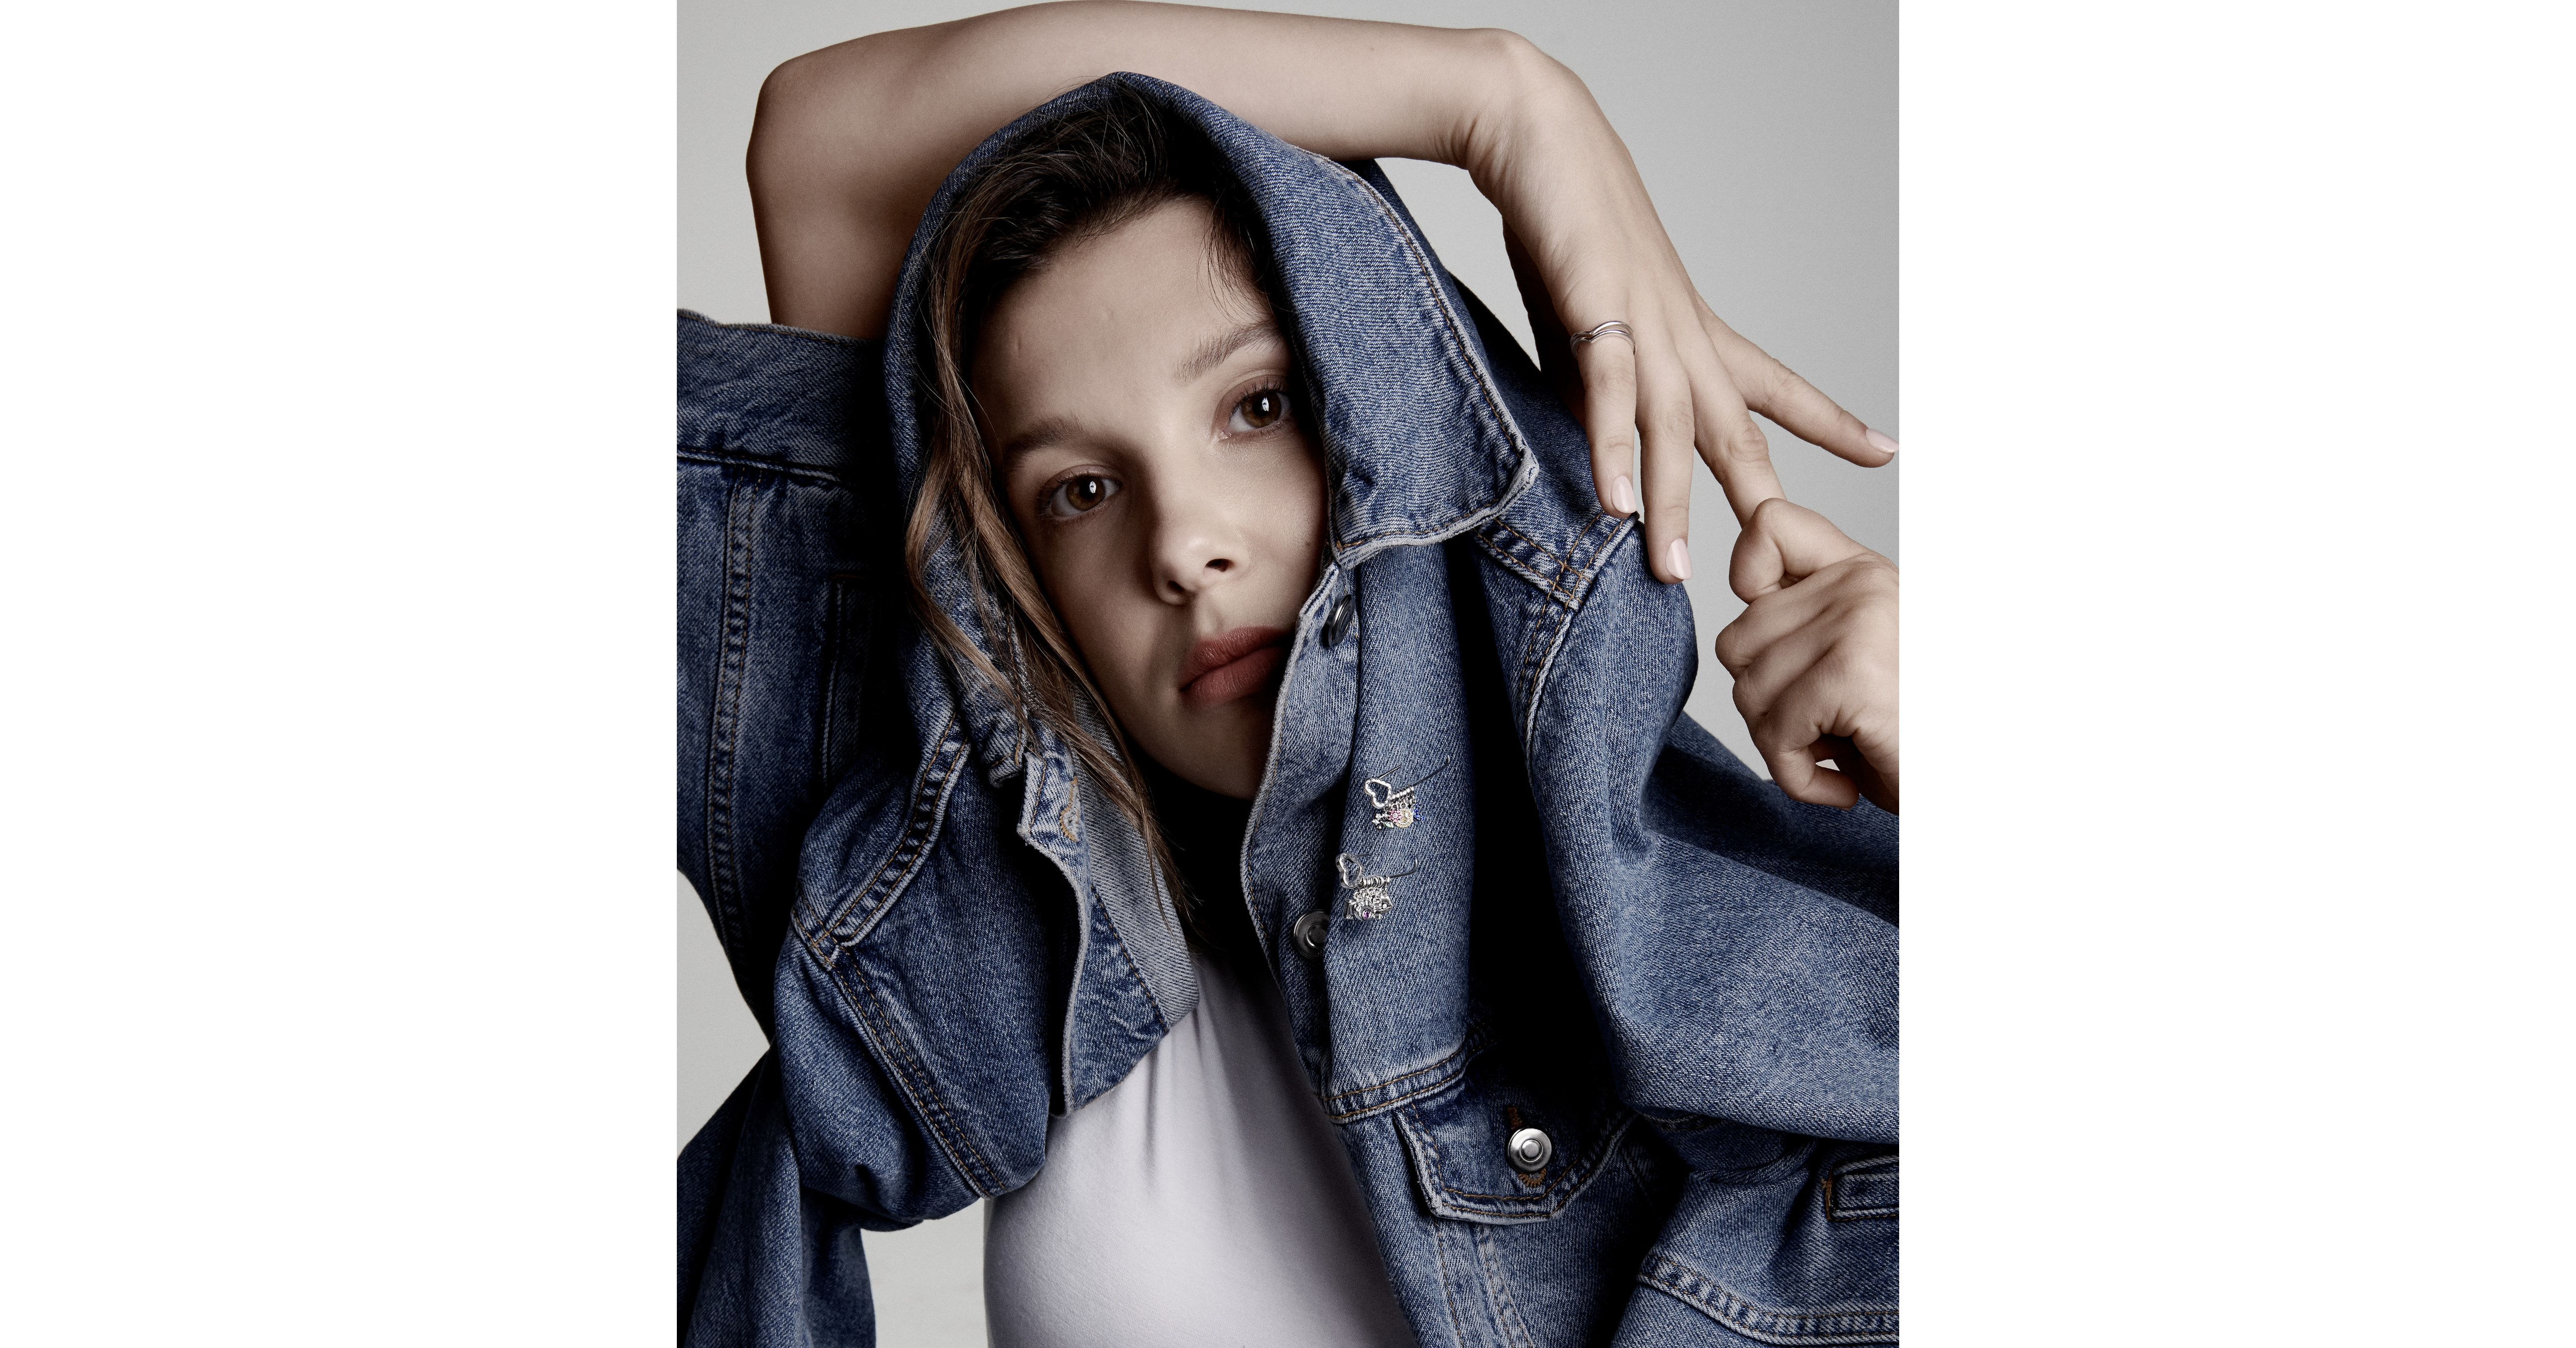 Millie Bobby Brown's New Pandora Collection Will Celebrate Self